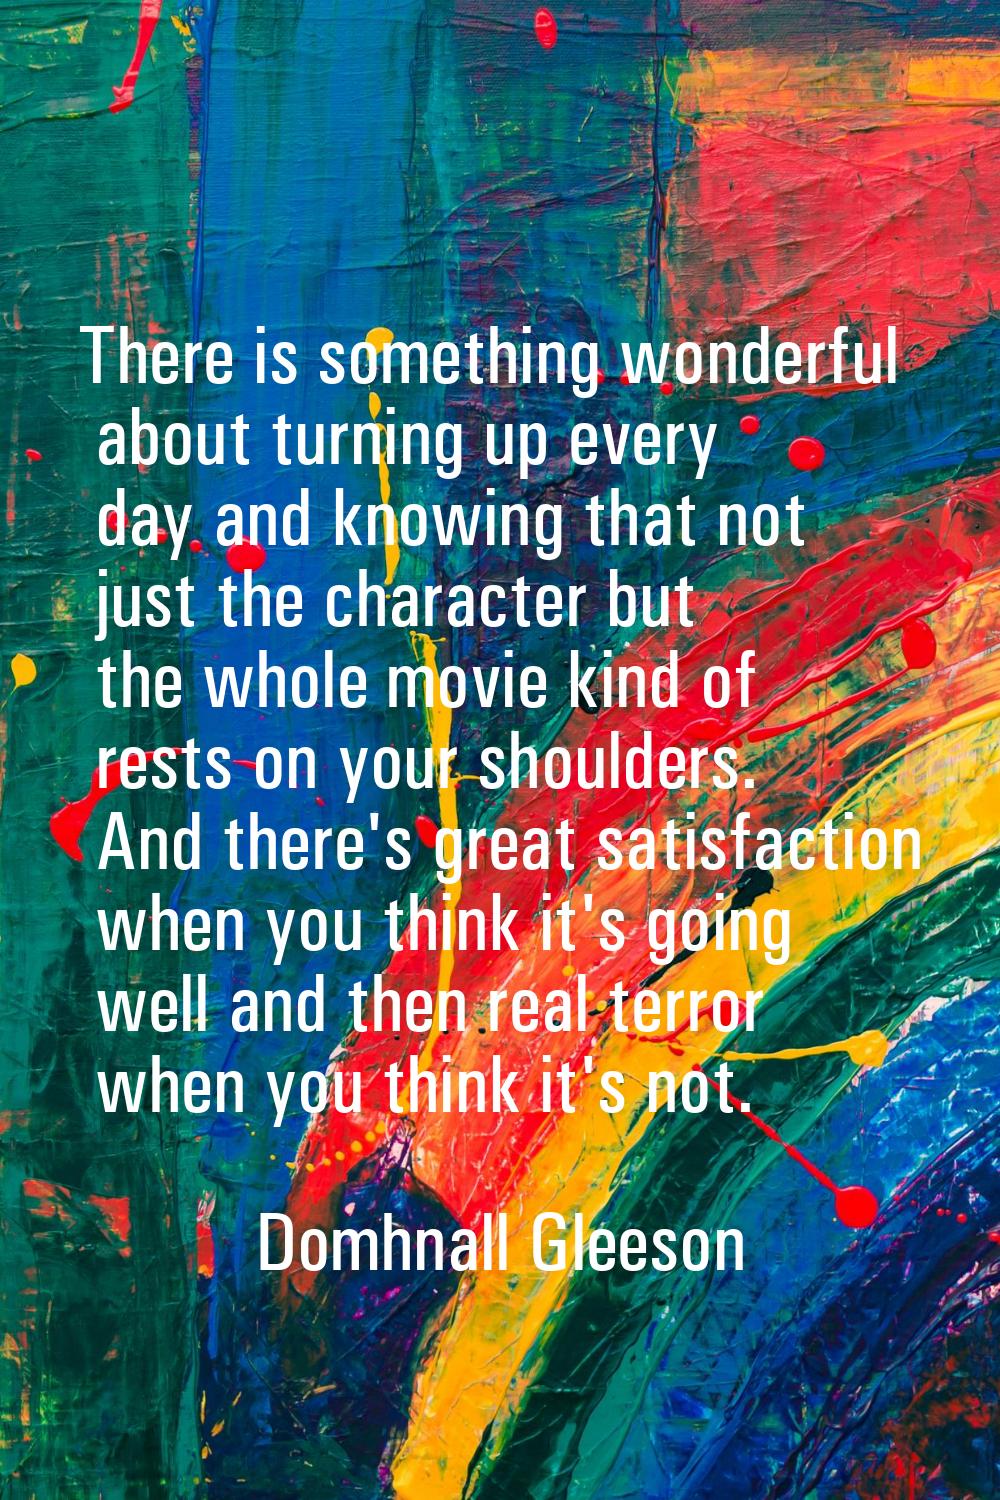 There is something wonderful about turning up every day and knowing that not just the character but